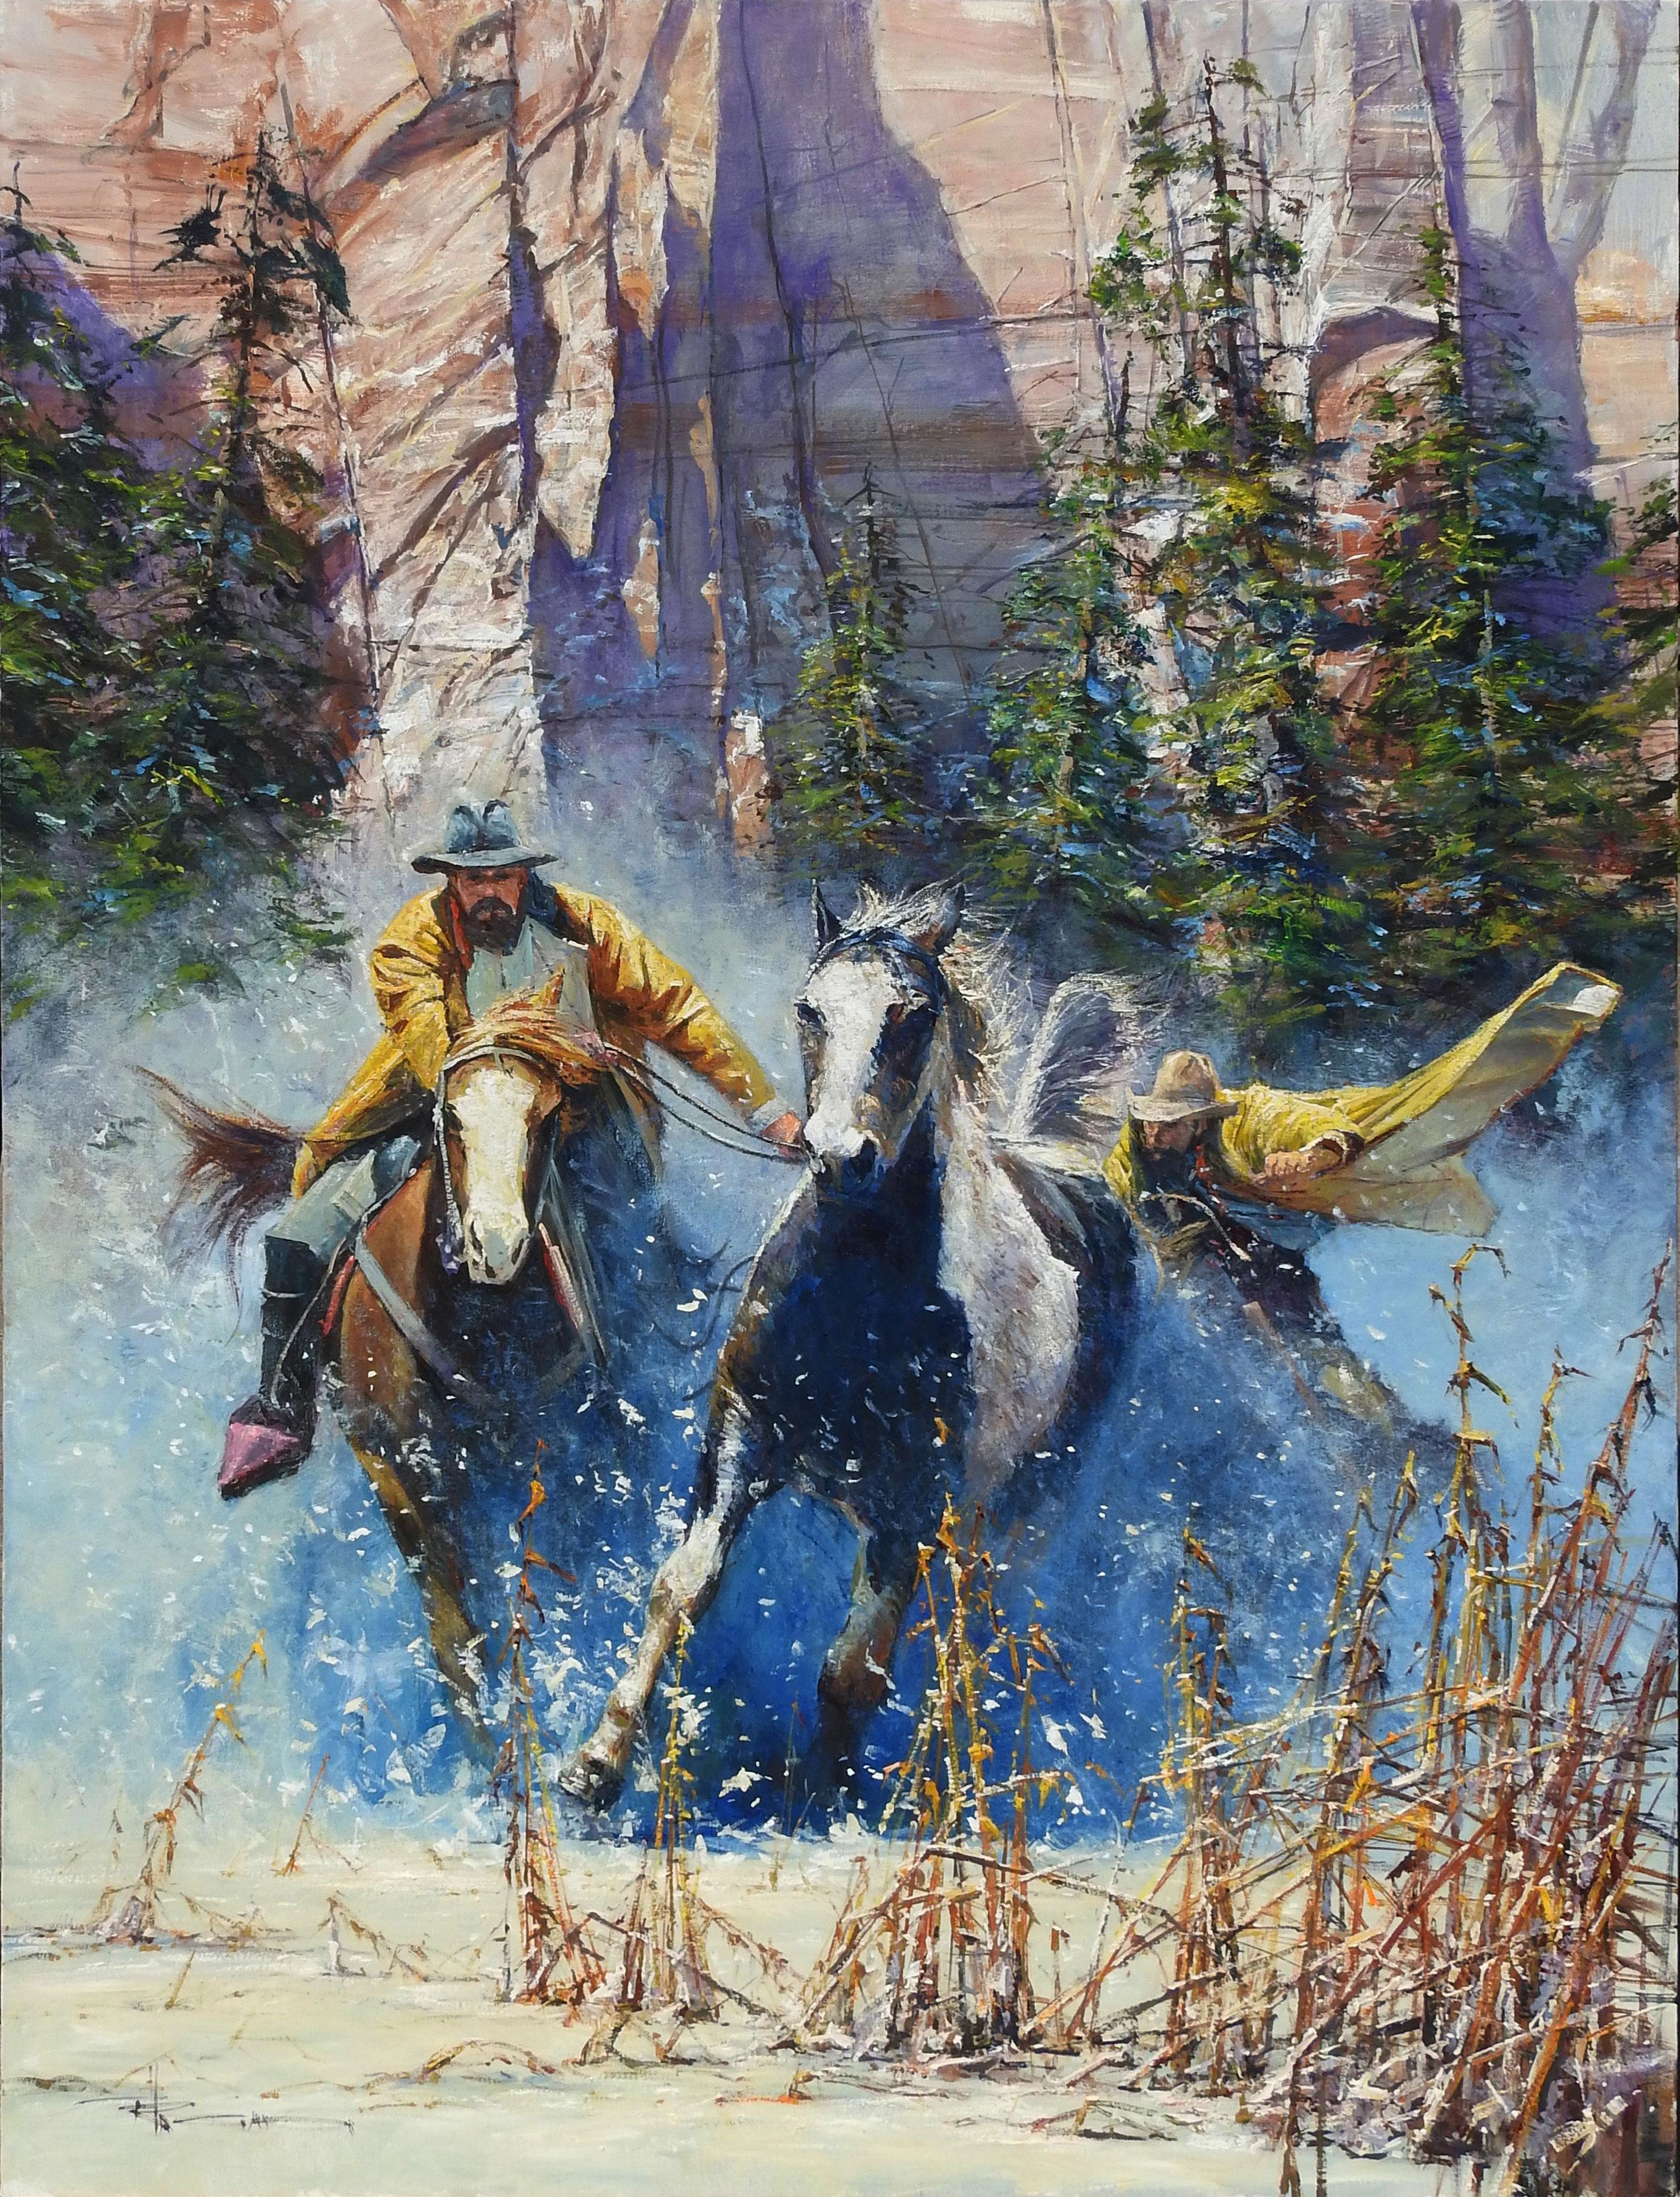 "The Runaway" by Robert Hagan is an original oil on canvas and measures 68x48.  
This captivating piece features two cowboys on horseback, donning yellow slickers, galloping through the canyons, kicking up snow in their pursuit of a black and white